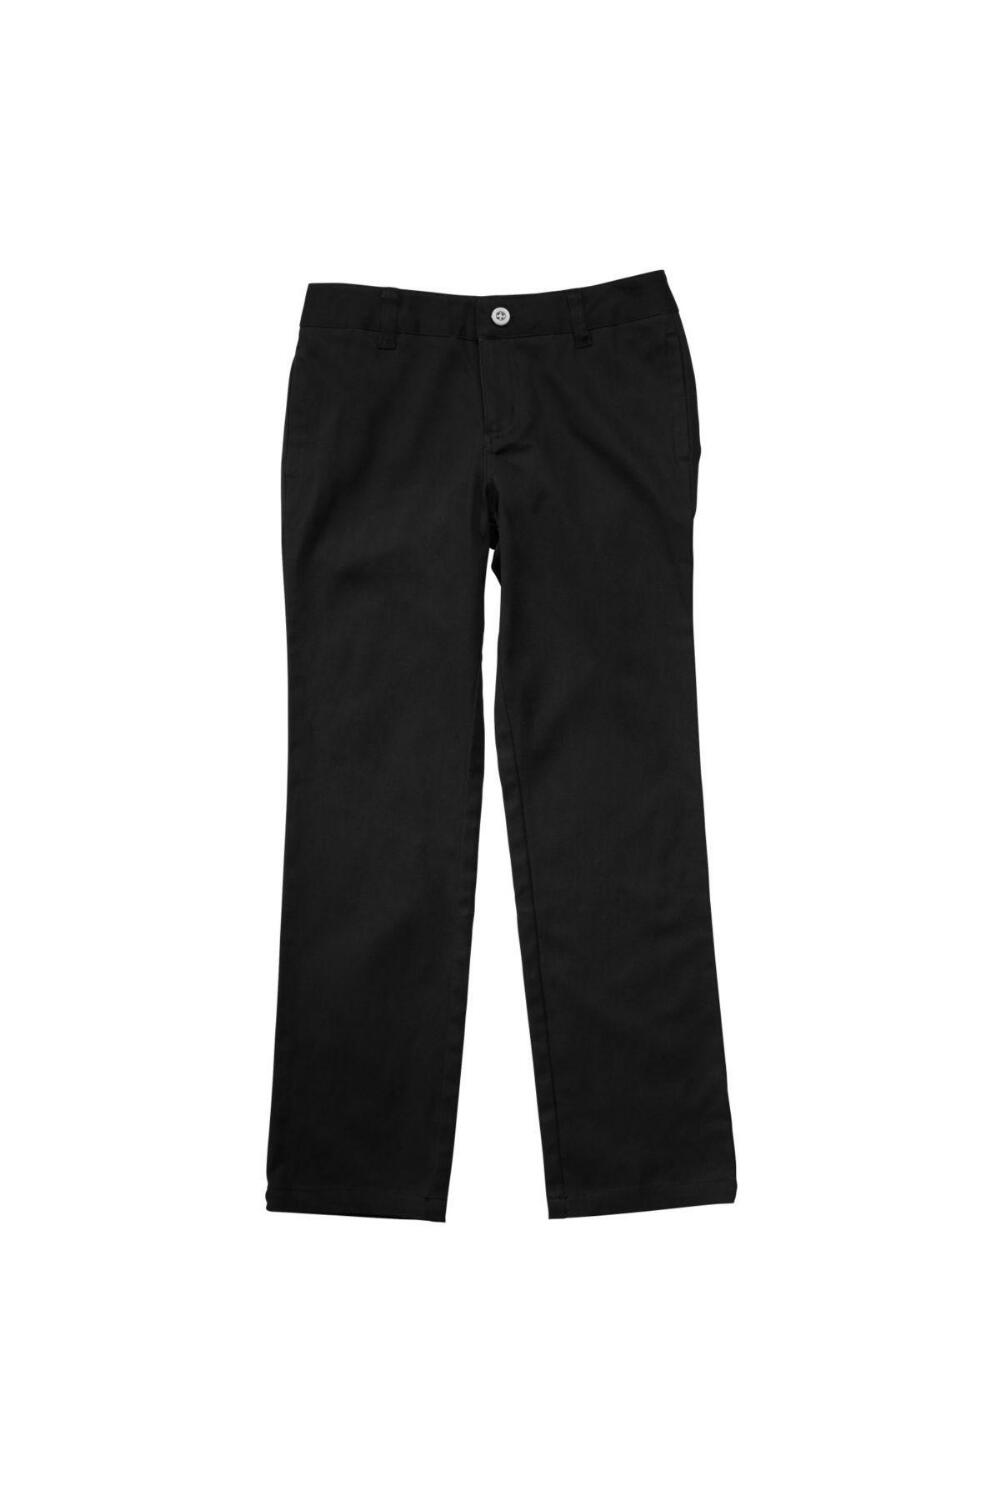 French Toast Girl's Straight Leg Twill Pant (Pant Color: Black, Pant Size: Size 4)